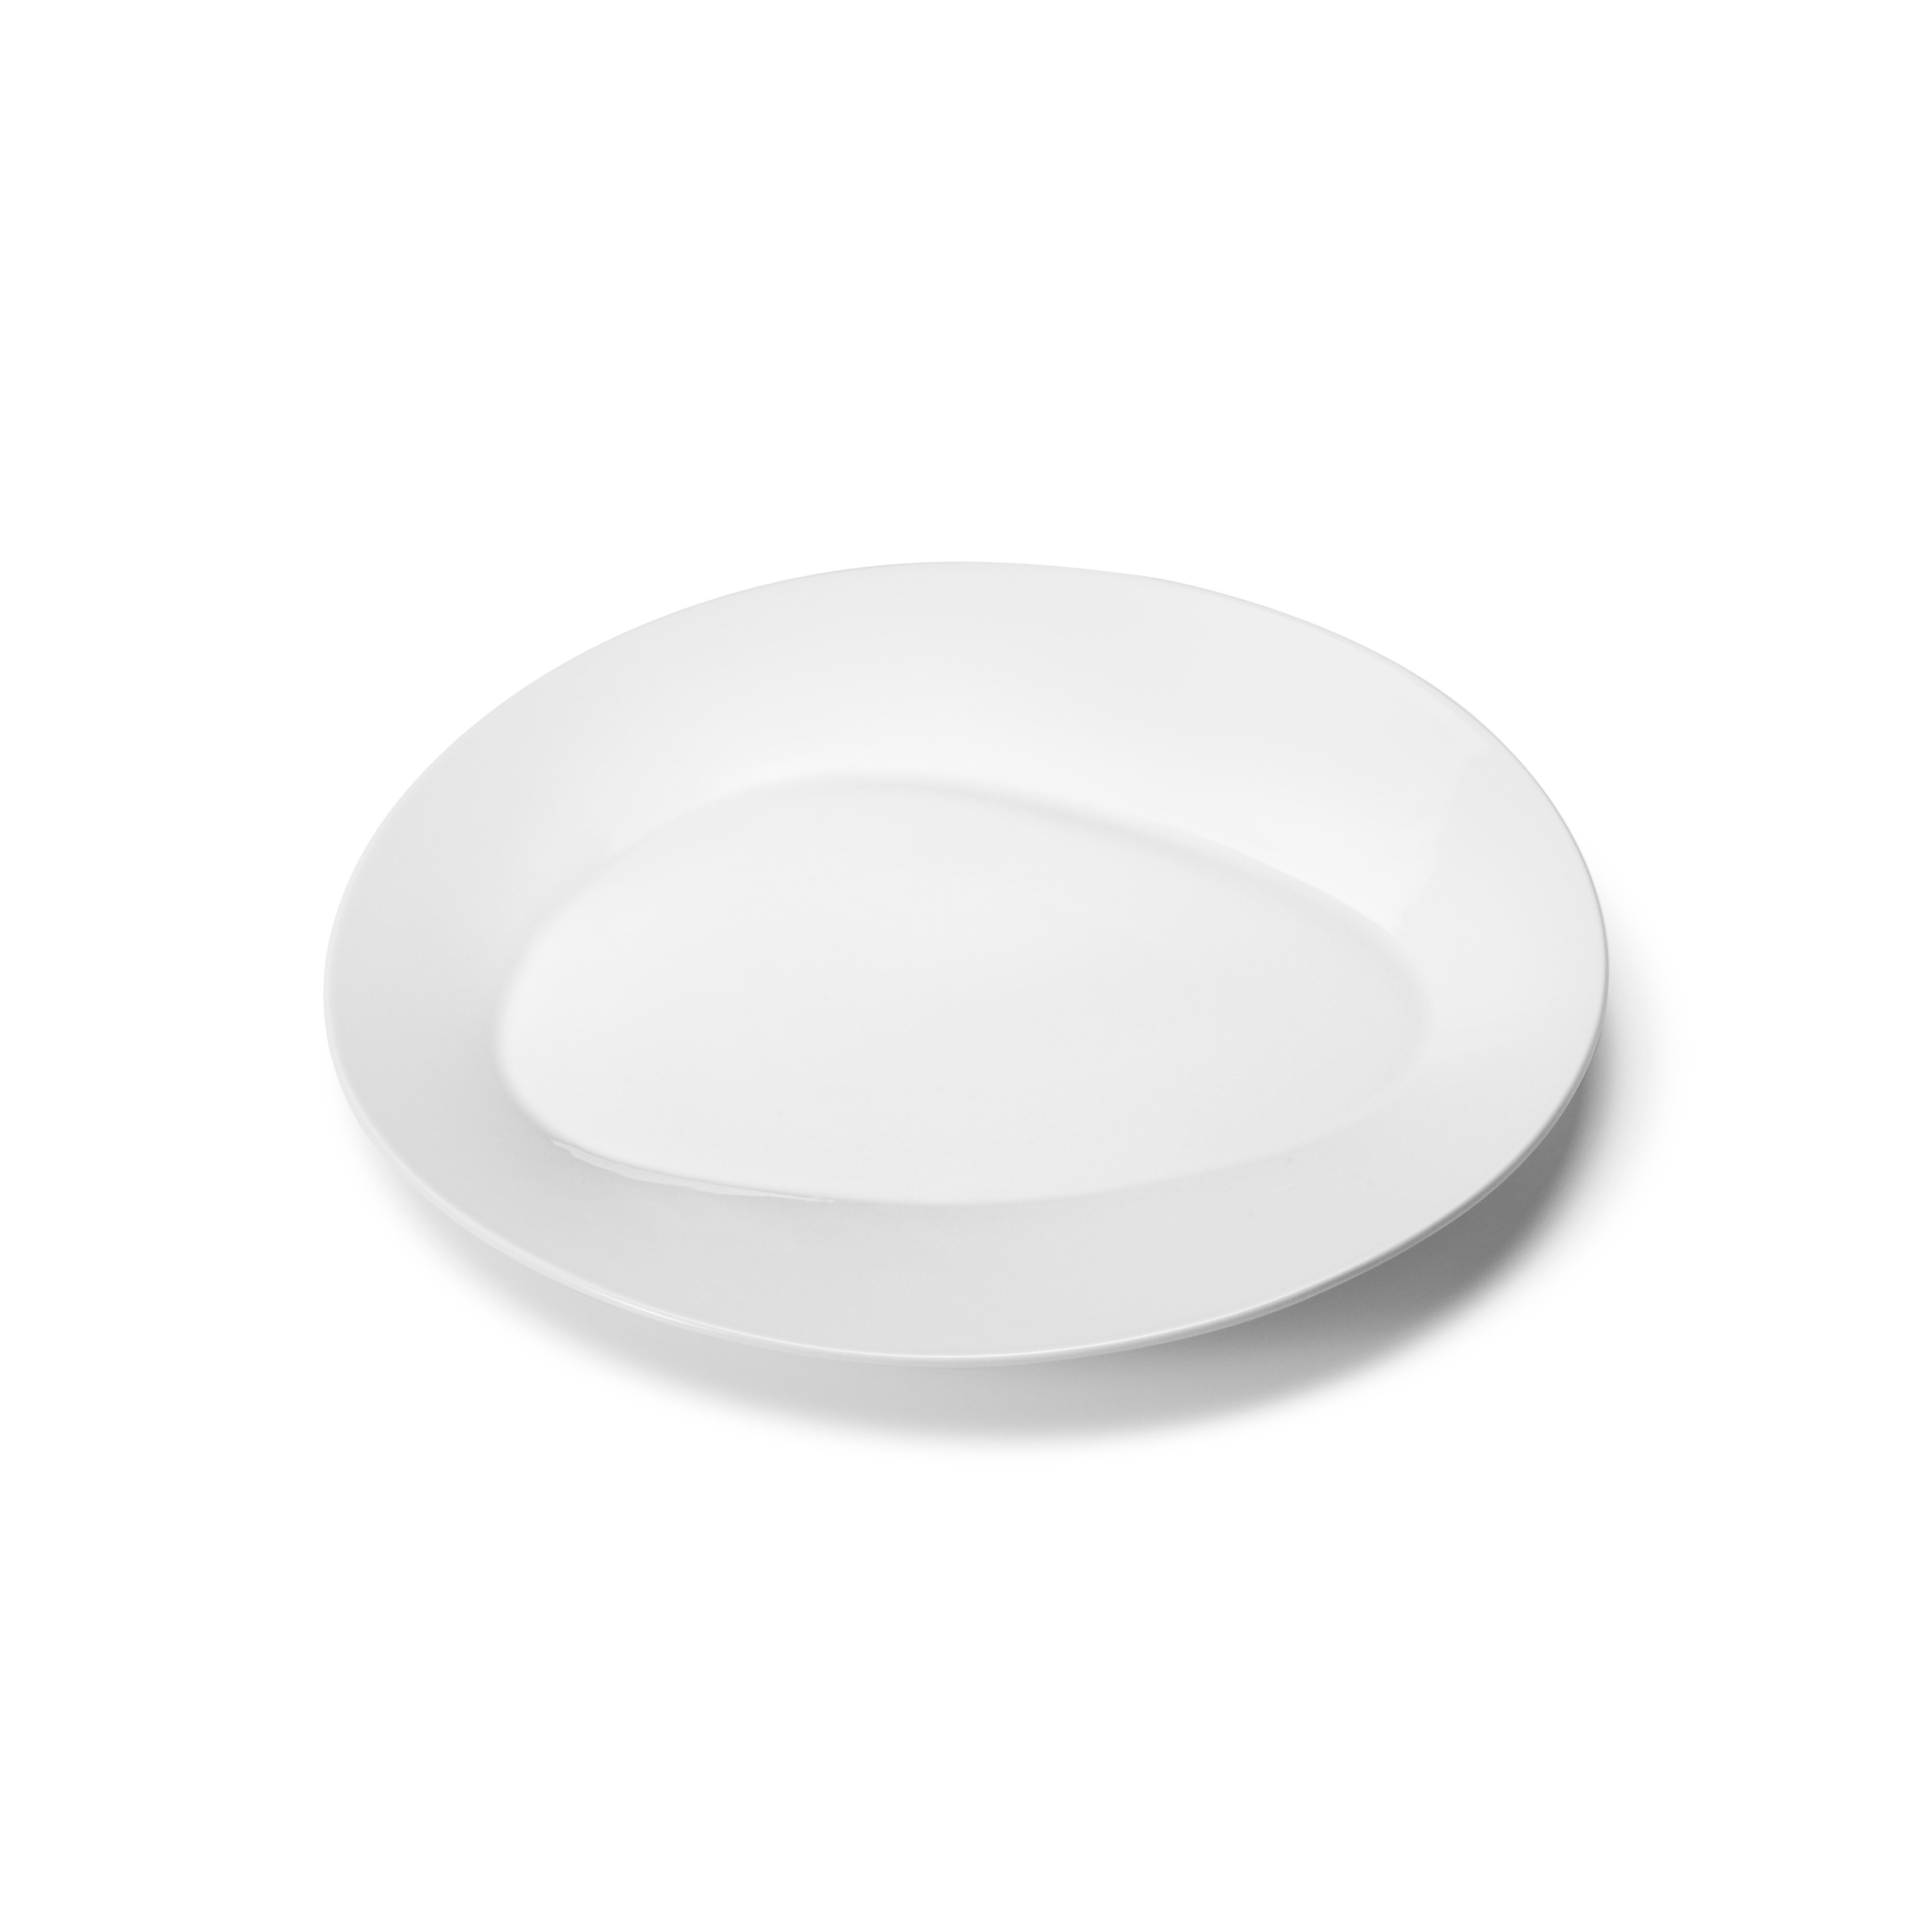 At first glance deceptively simple, this white porcelain dinner plate - on closer inspection - reveals itself to have the distinctive organic shape from the Sky collection as its base. This minimalist detail adds an unusual and stylish frame to the